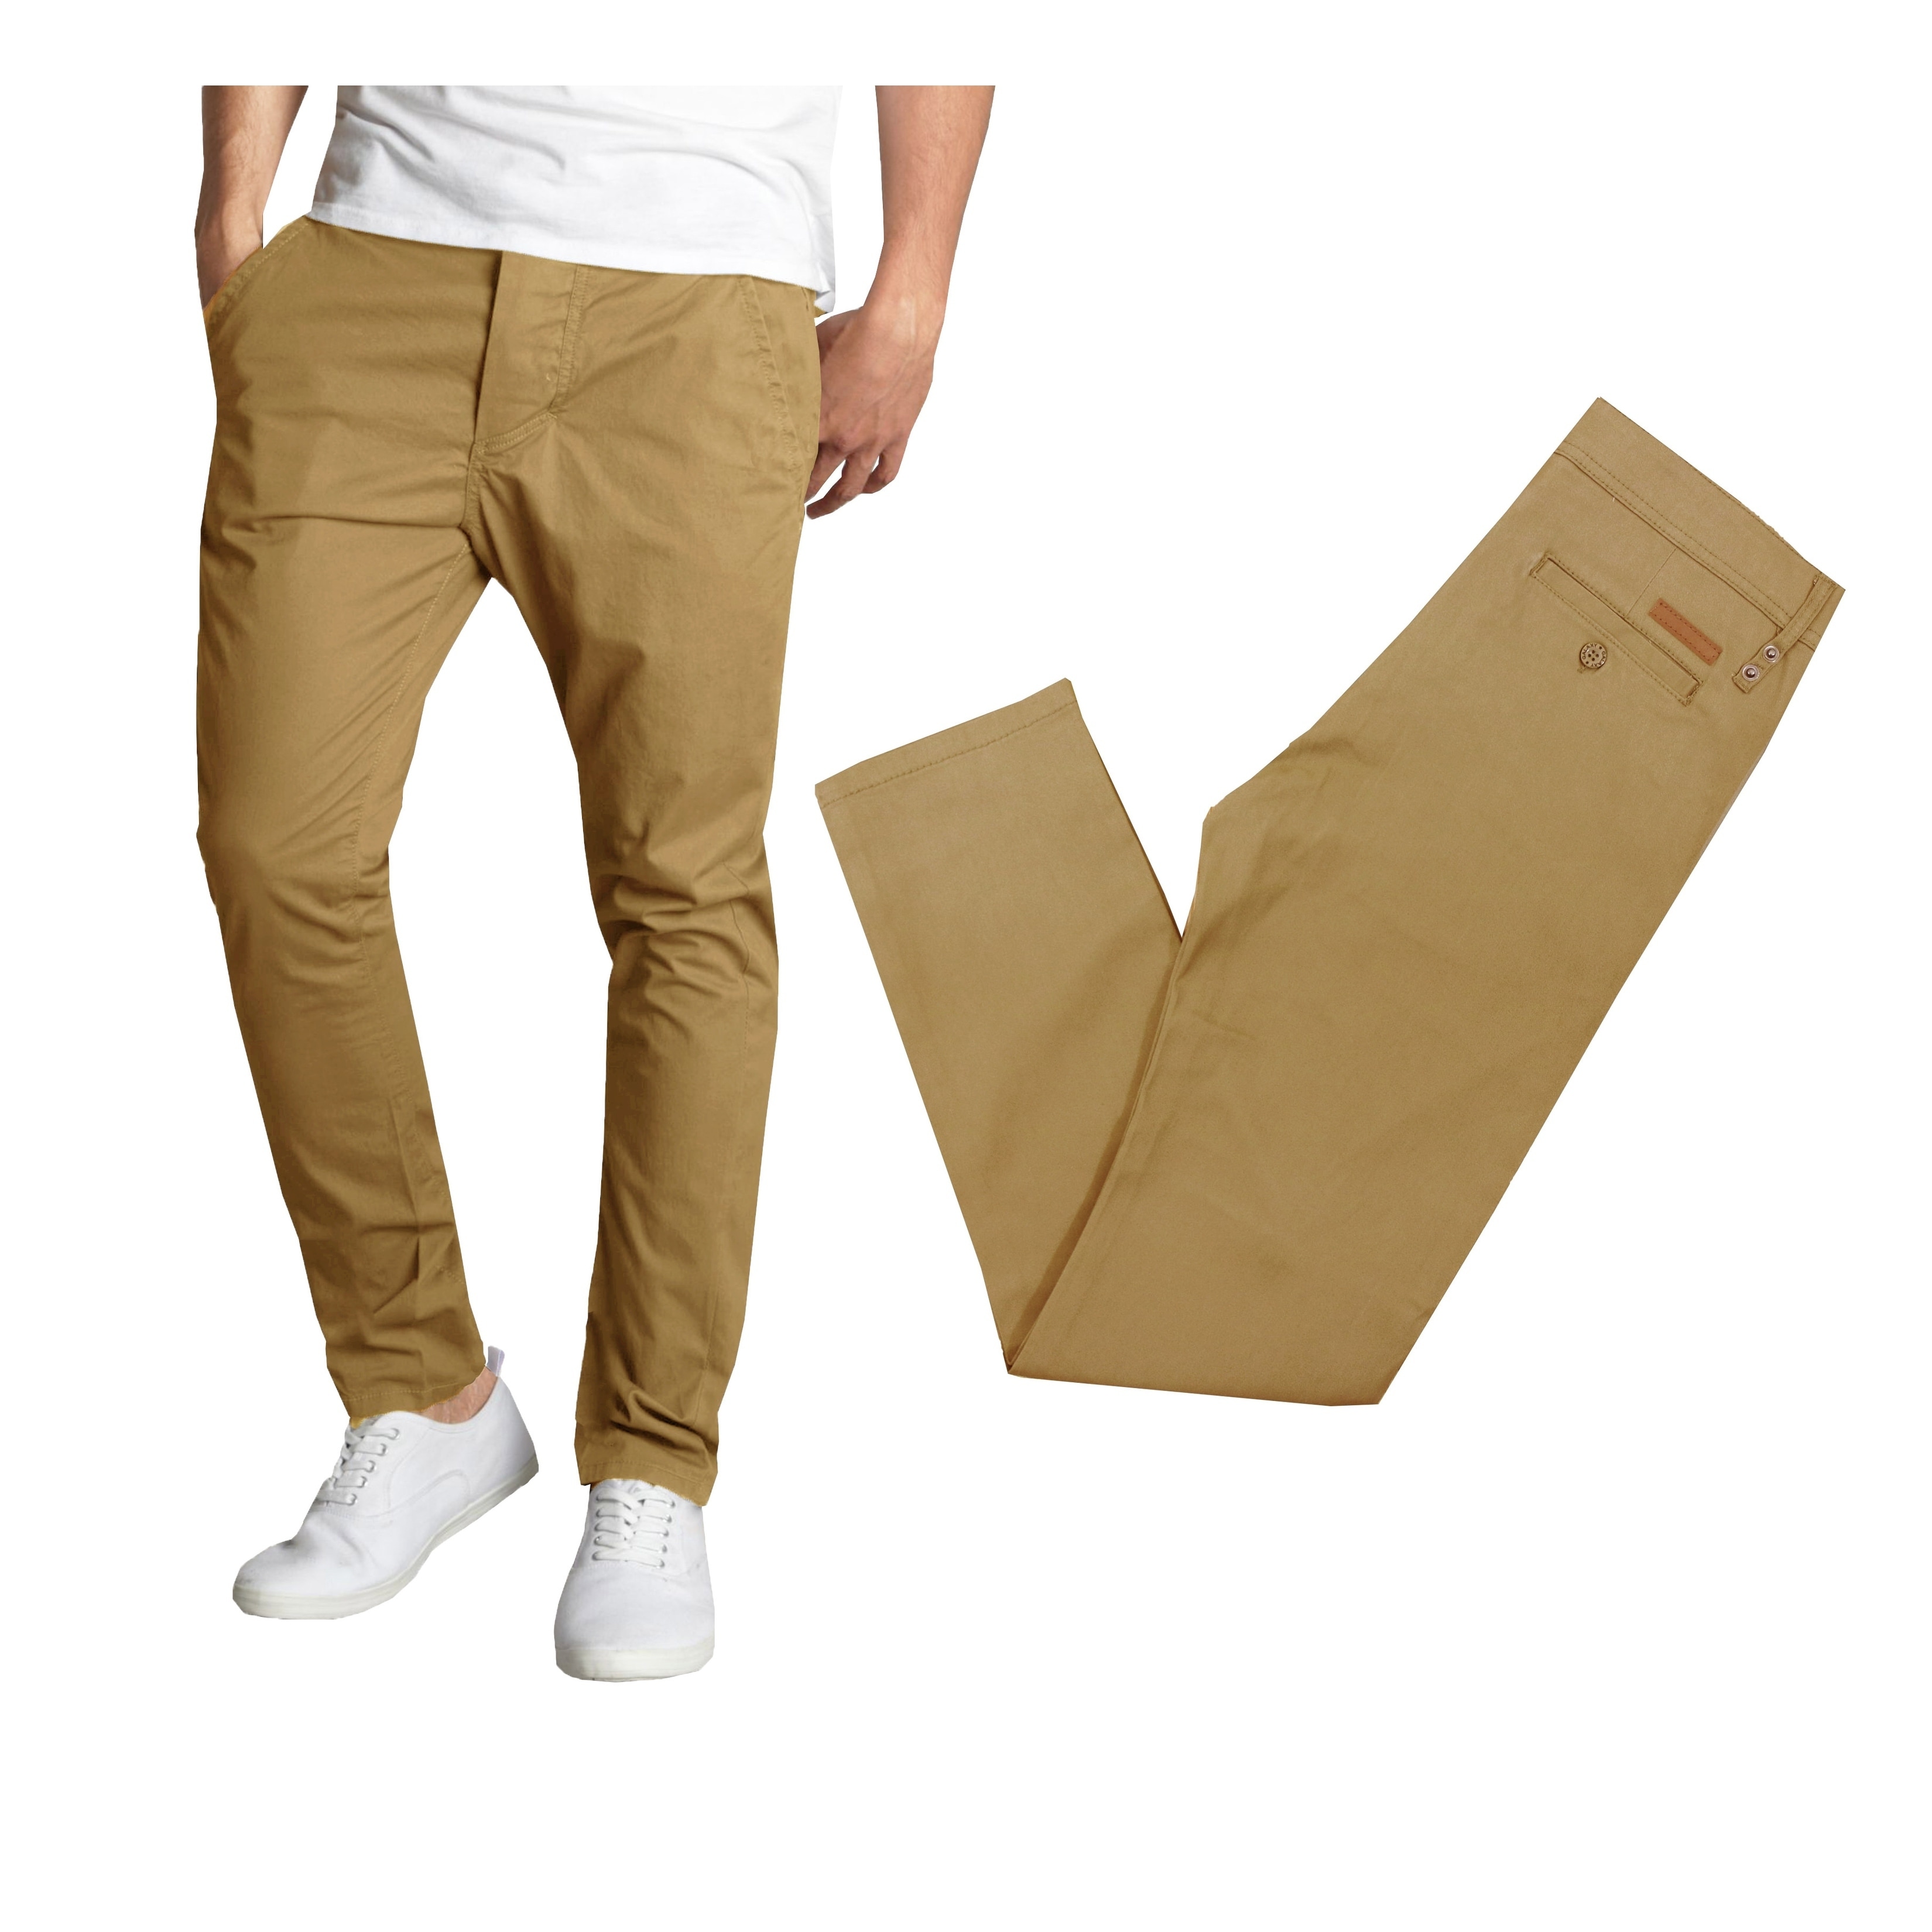 Regular Fit Mens Cotton Cargo Pant, Gender : Male, Waist Size : 30 Inch, 32  Inch, 34 Inch at Best Price in Ghaziabad